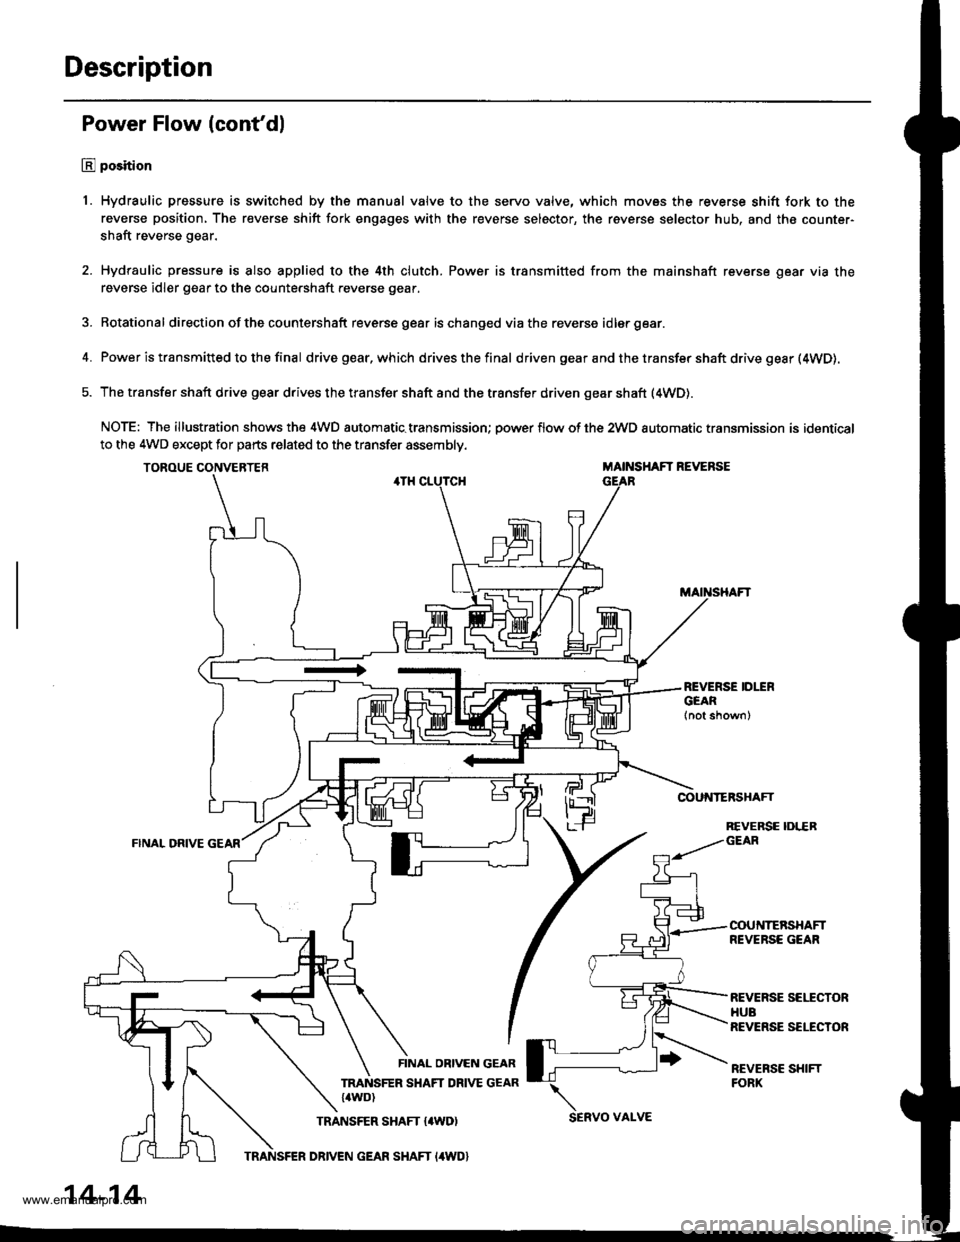 HONDA CR-V 1999 RD1-RD3 / 1.G Workshop Manual 
Description
Power Flow (contdl
E position
1. Hydraulic pressure is switched by the manual valve to the servo valve, which movss the reverse shift fork to the
reverse position, The reverse shift fork